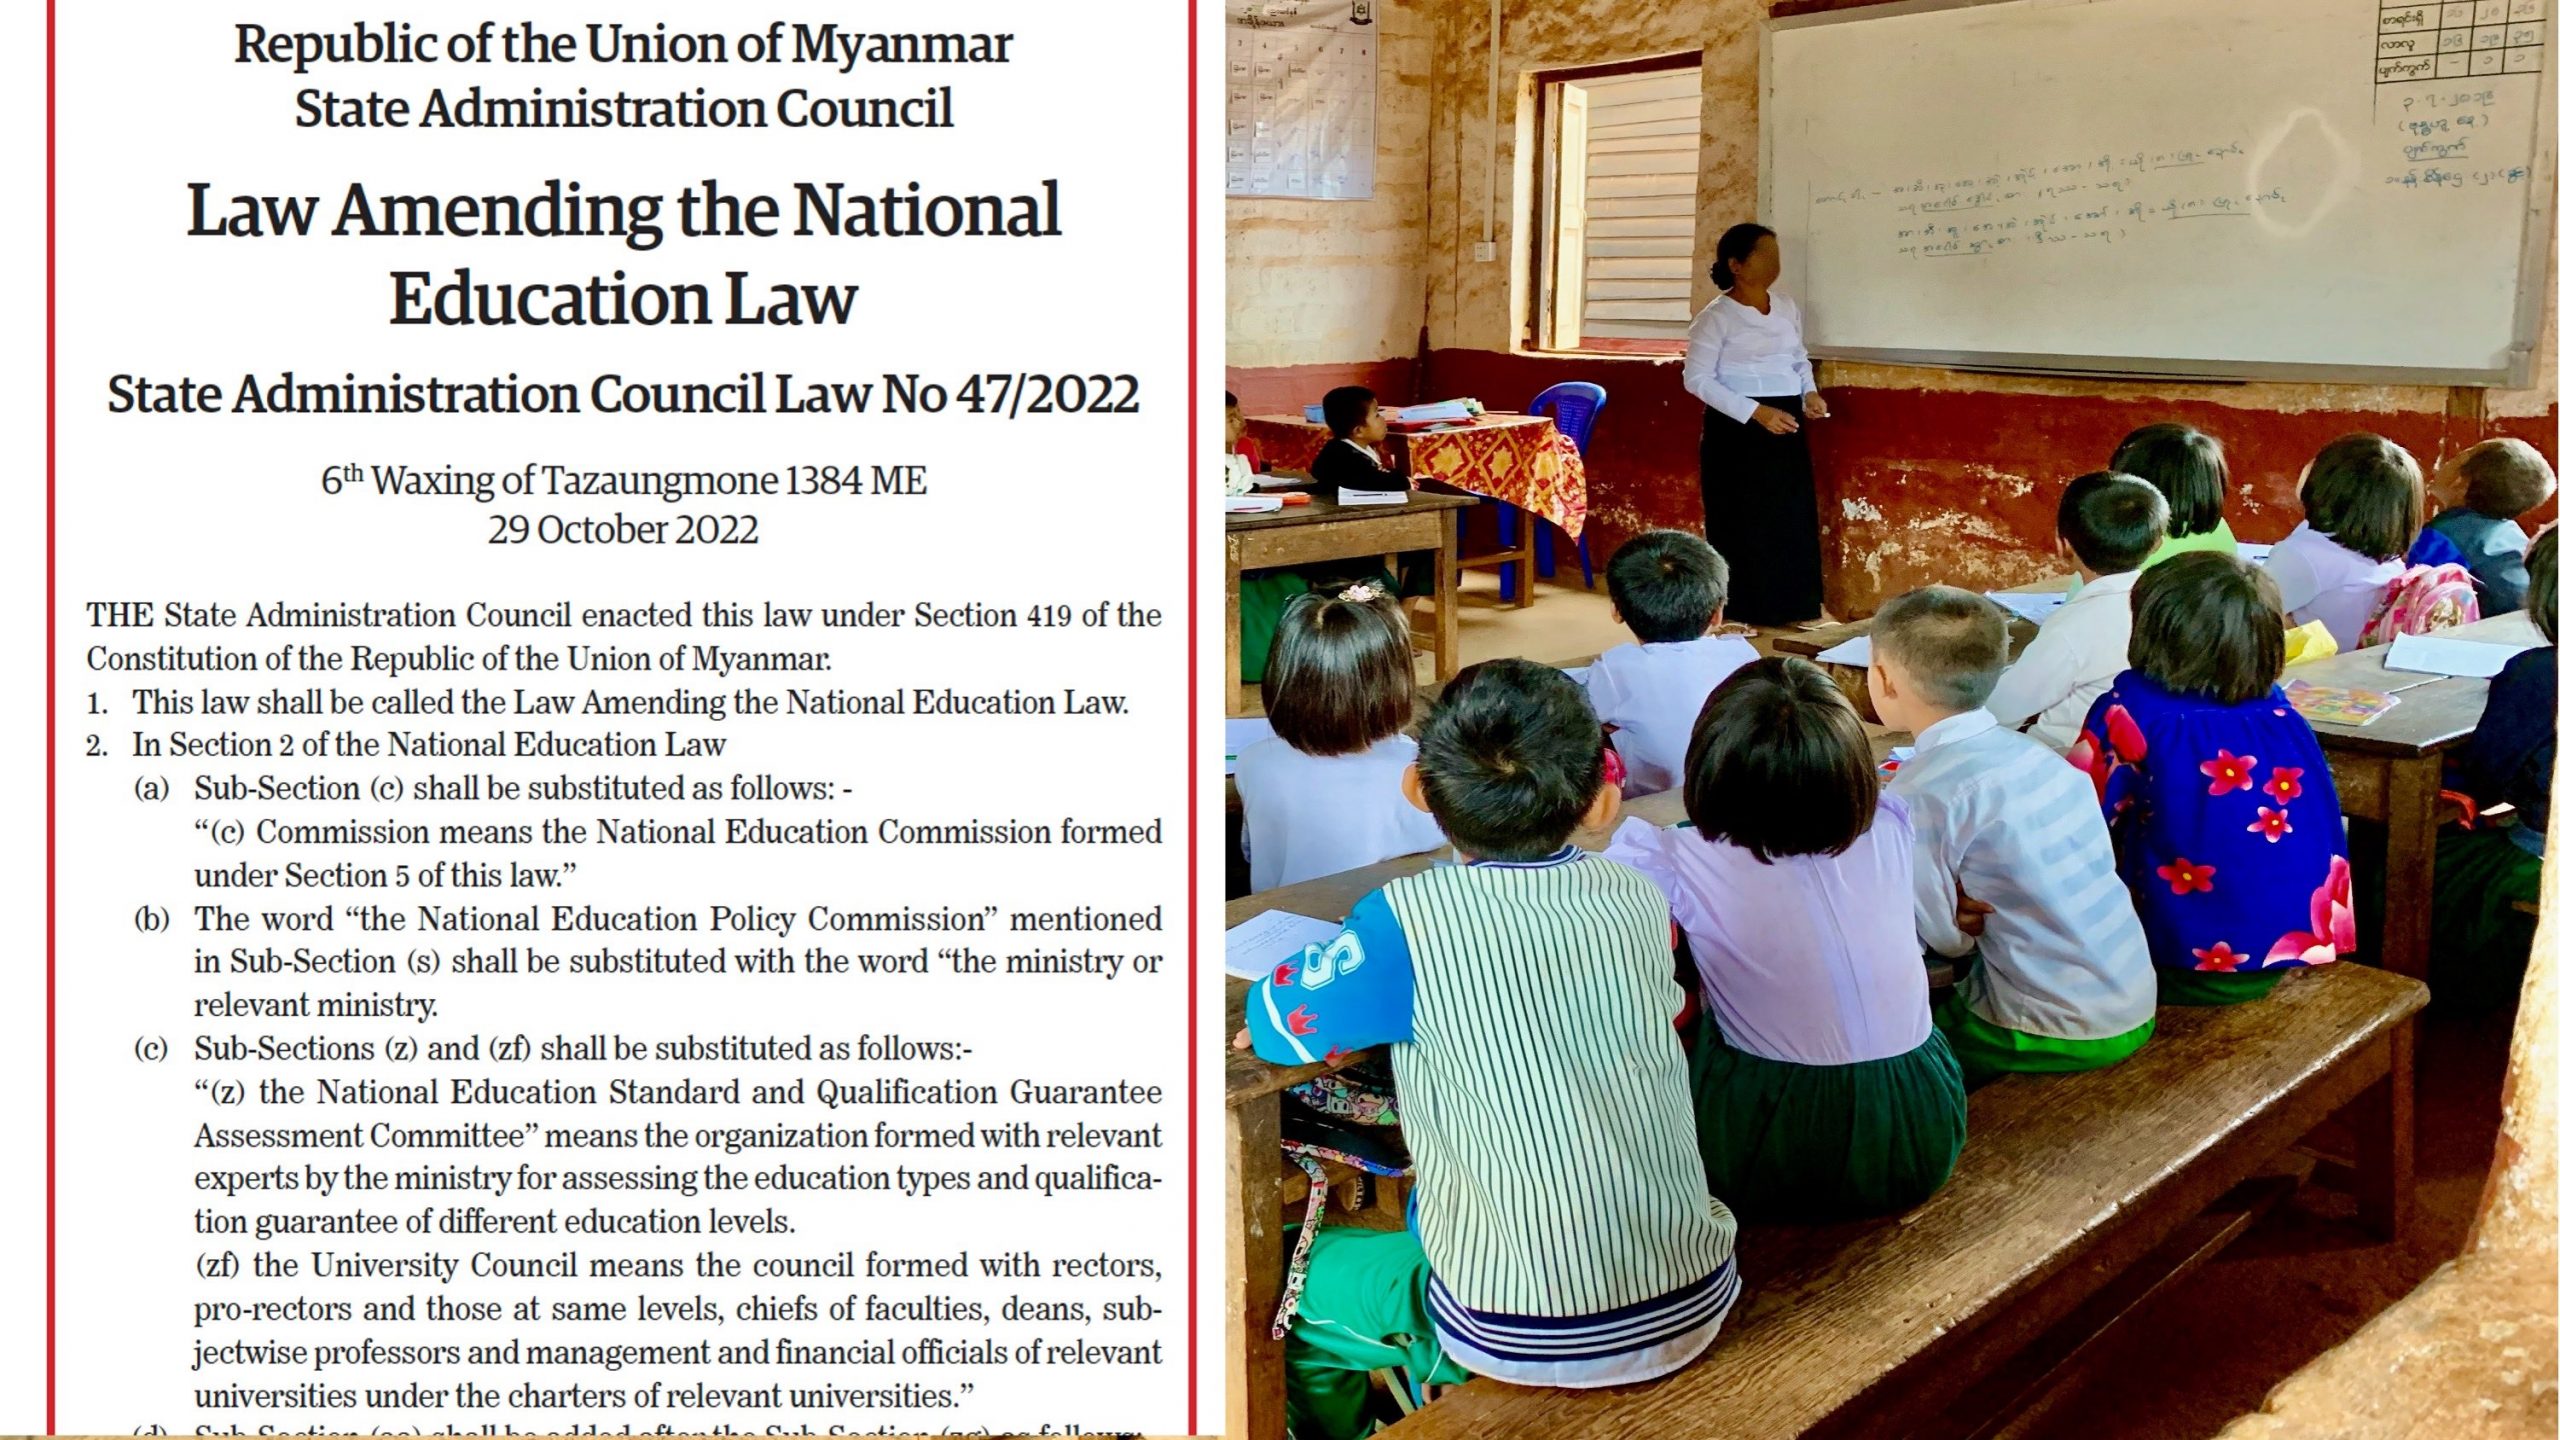 Amendment of the National Education Law and other language-in-education developments following the 2021 military coup in Myanmar (Part 1)